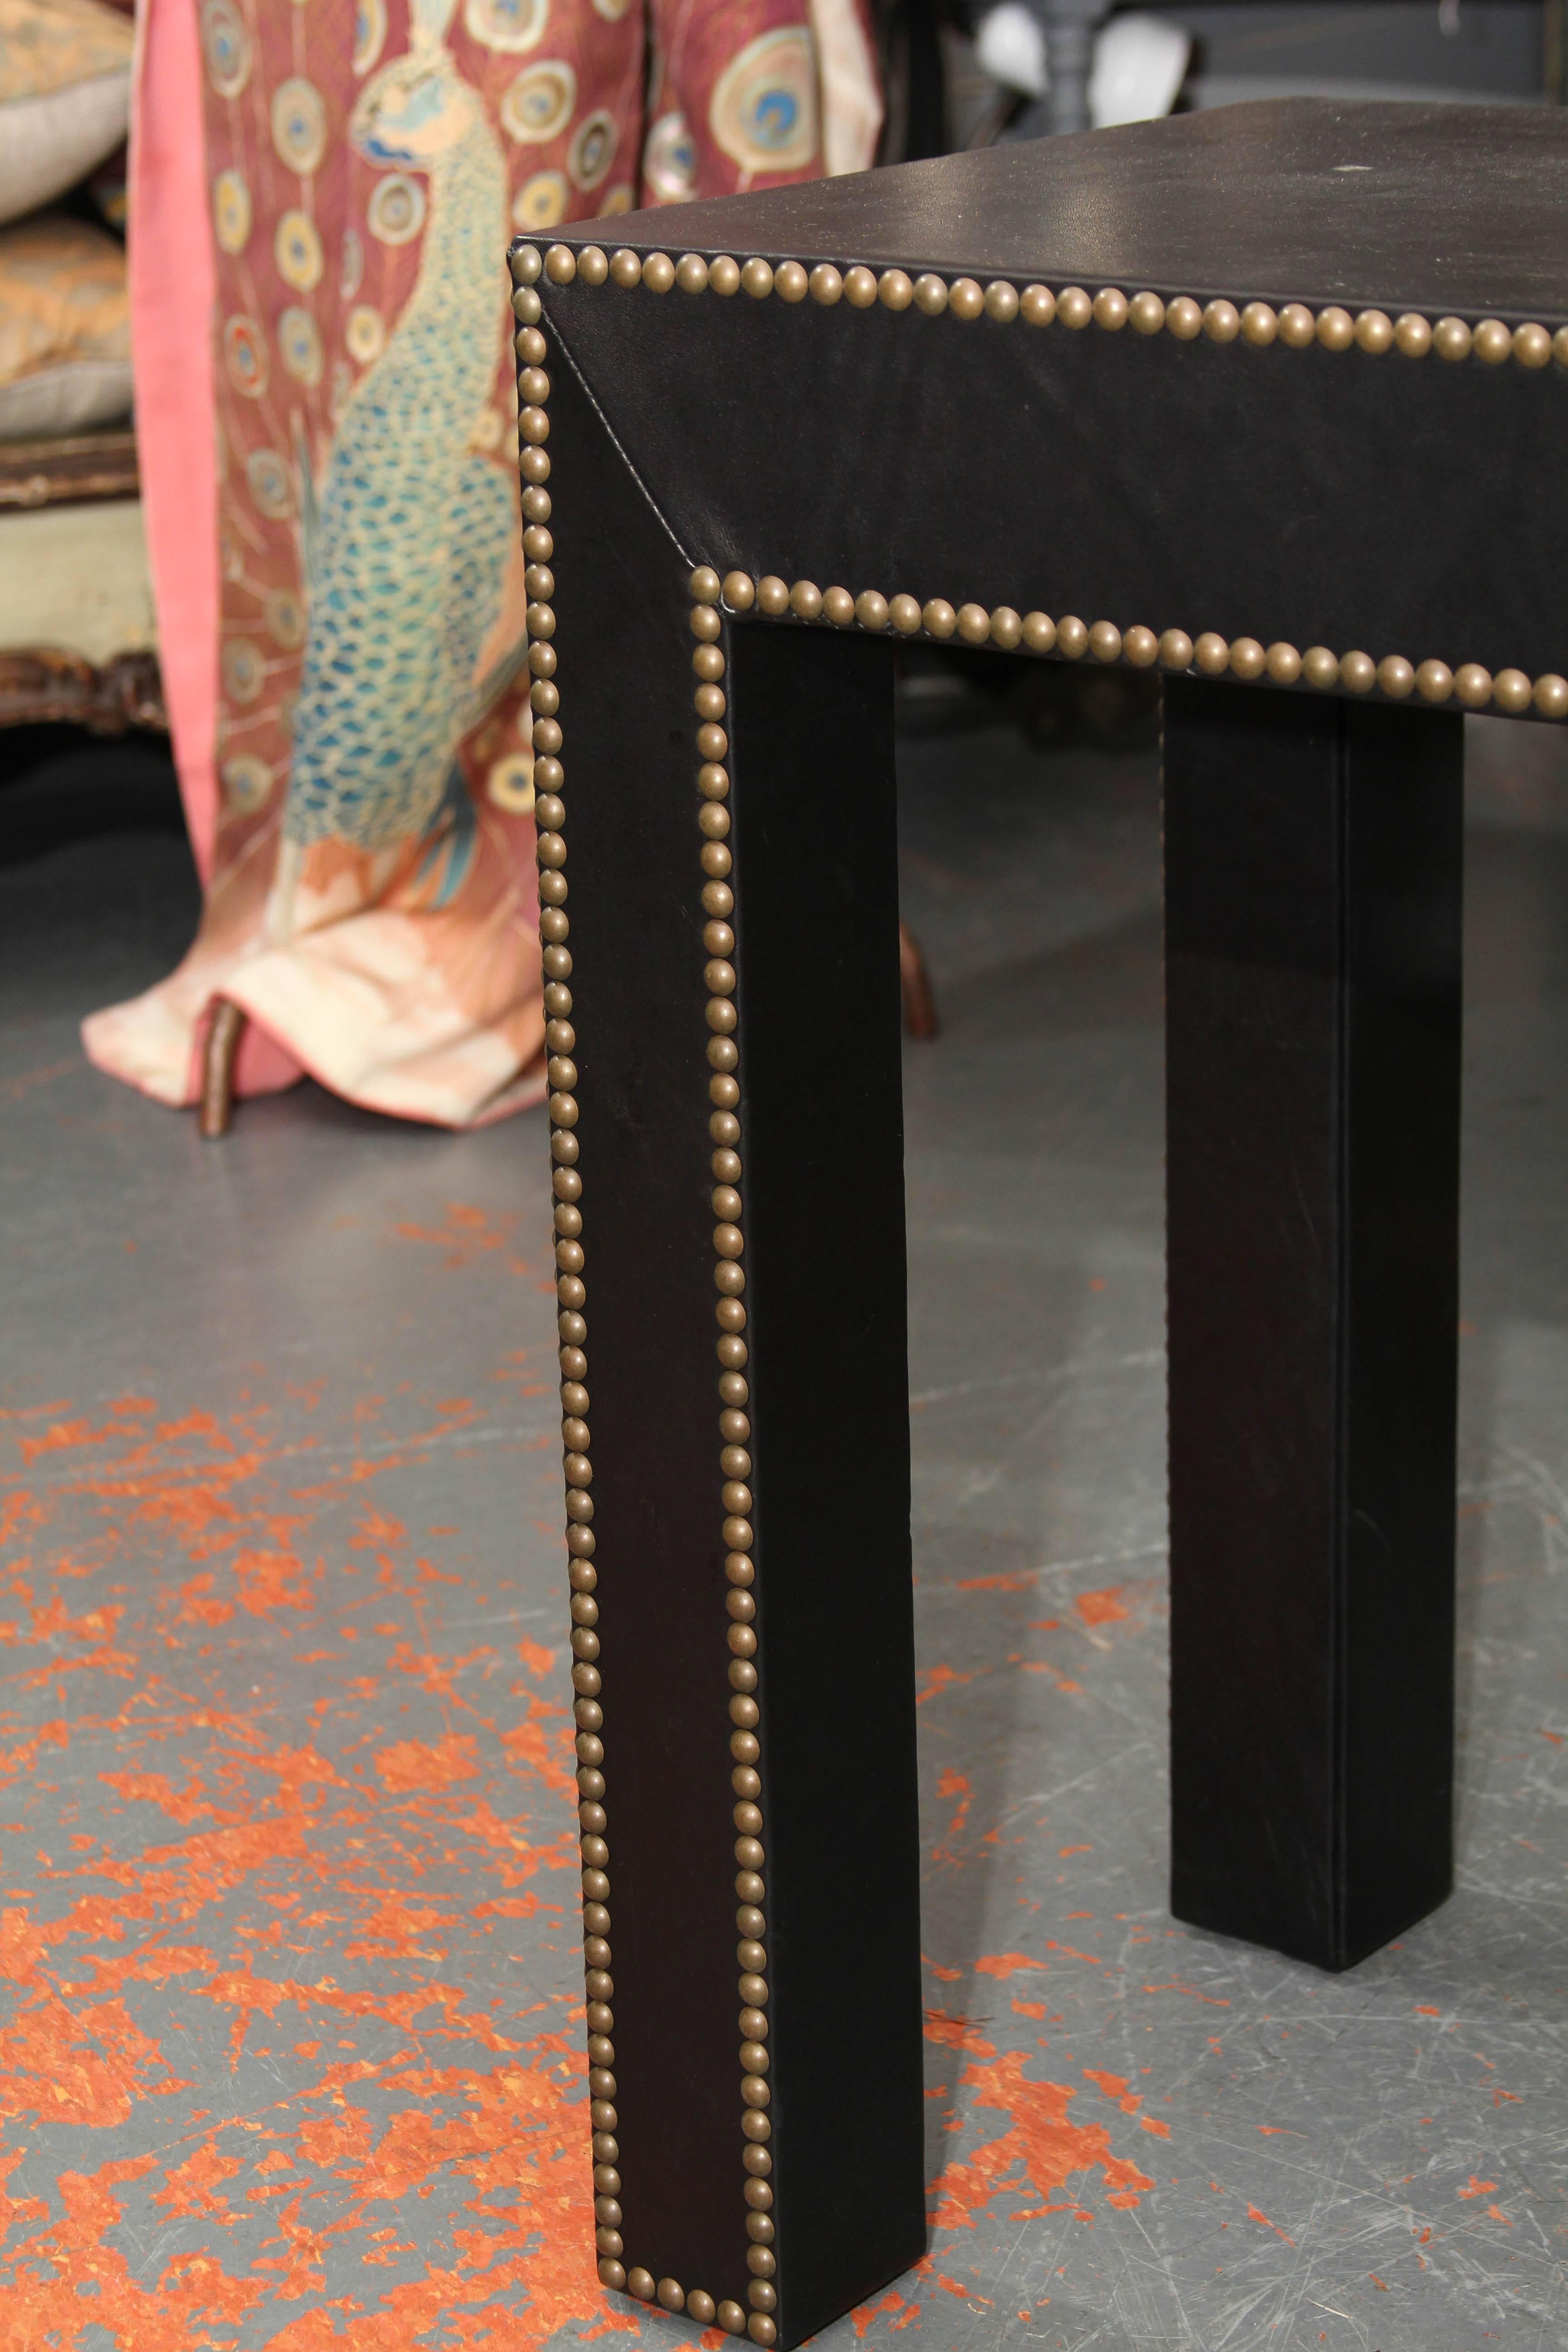 American Modern Console Table in Black Leather and Nailhead Trim